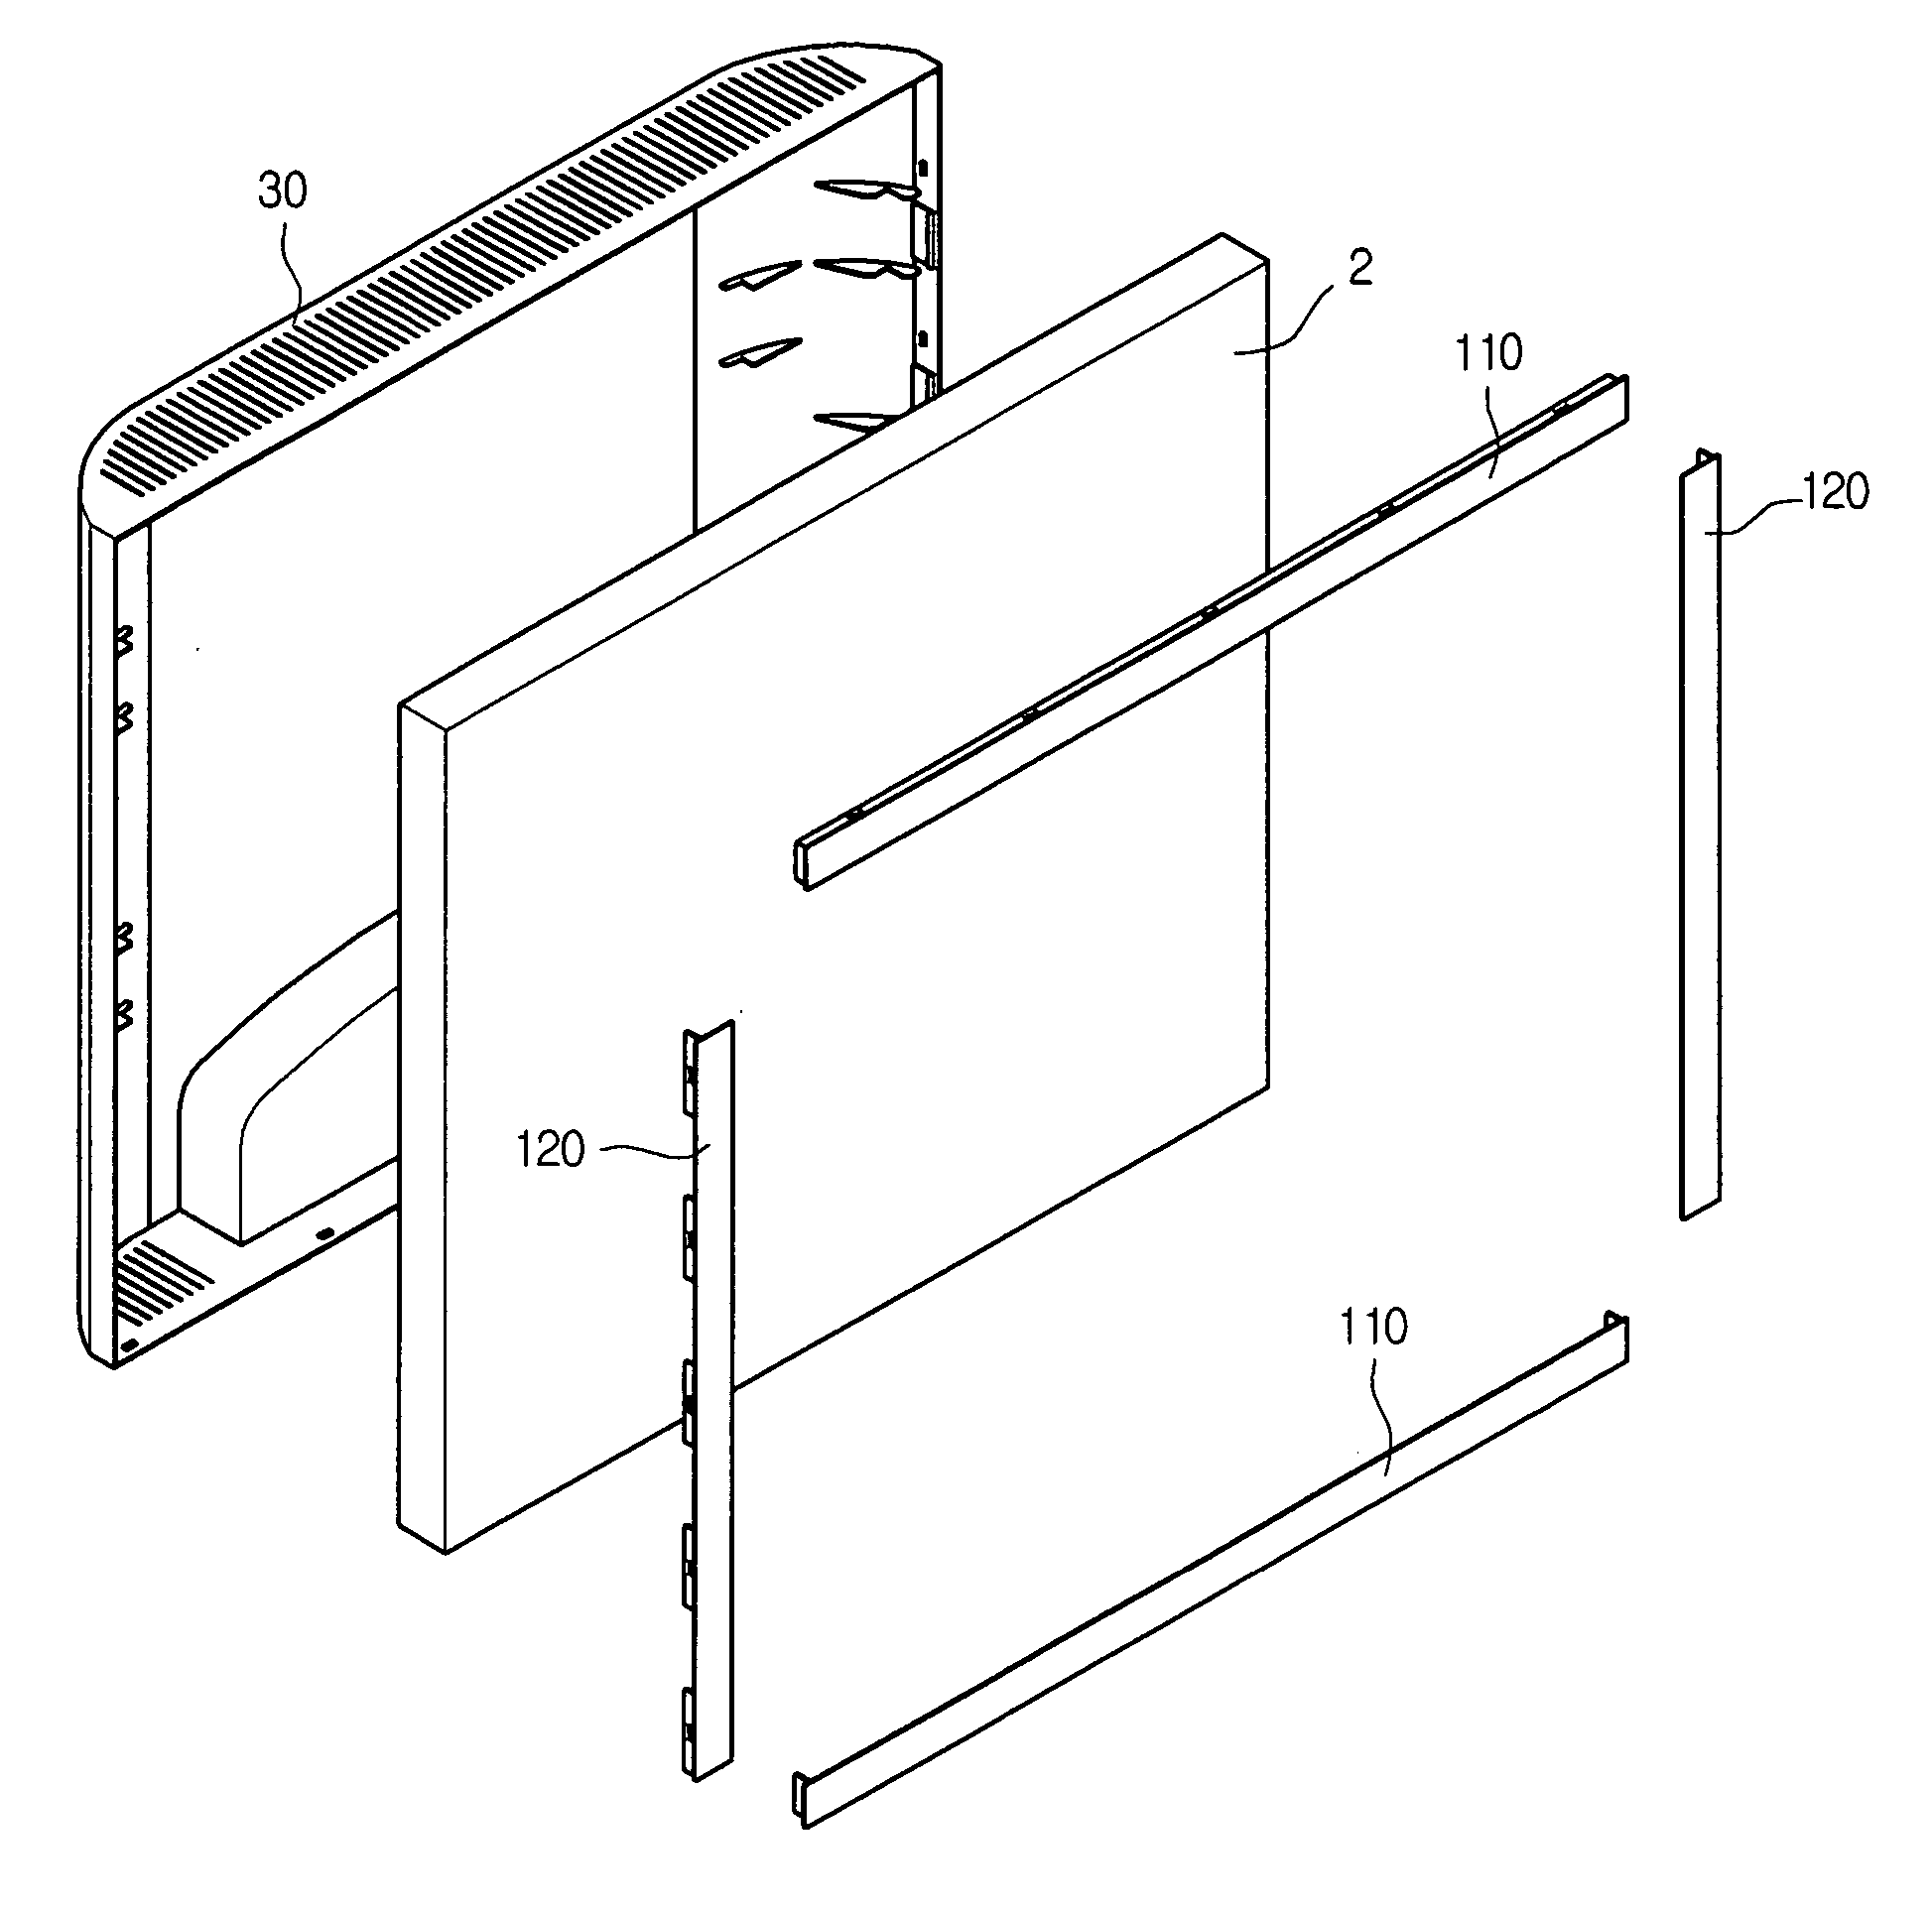 Display device, cabinet assembly for the display device and method of assembling the display device